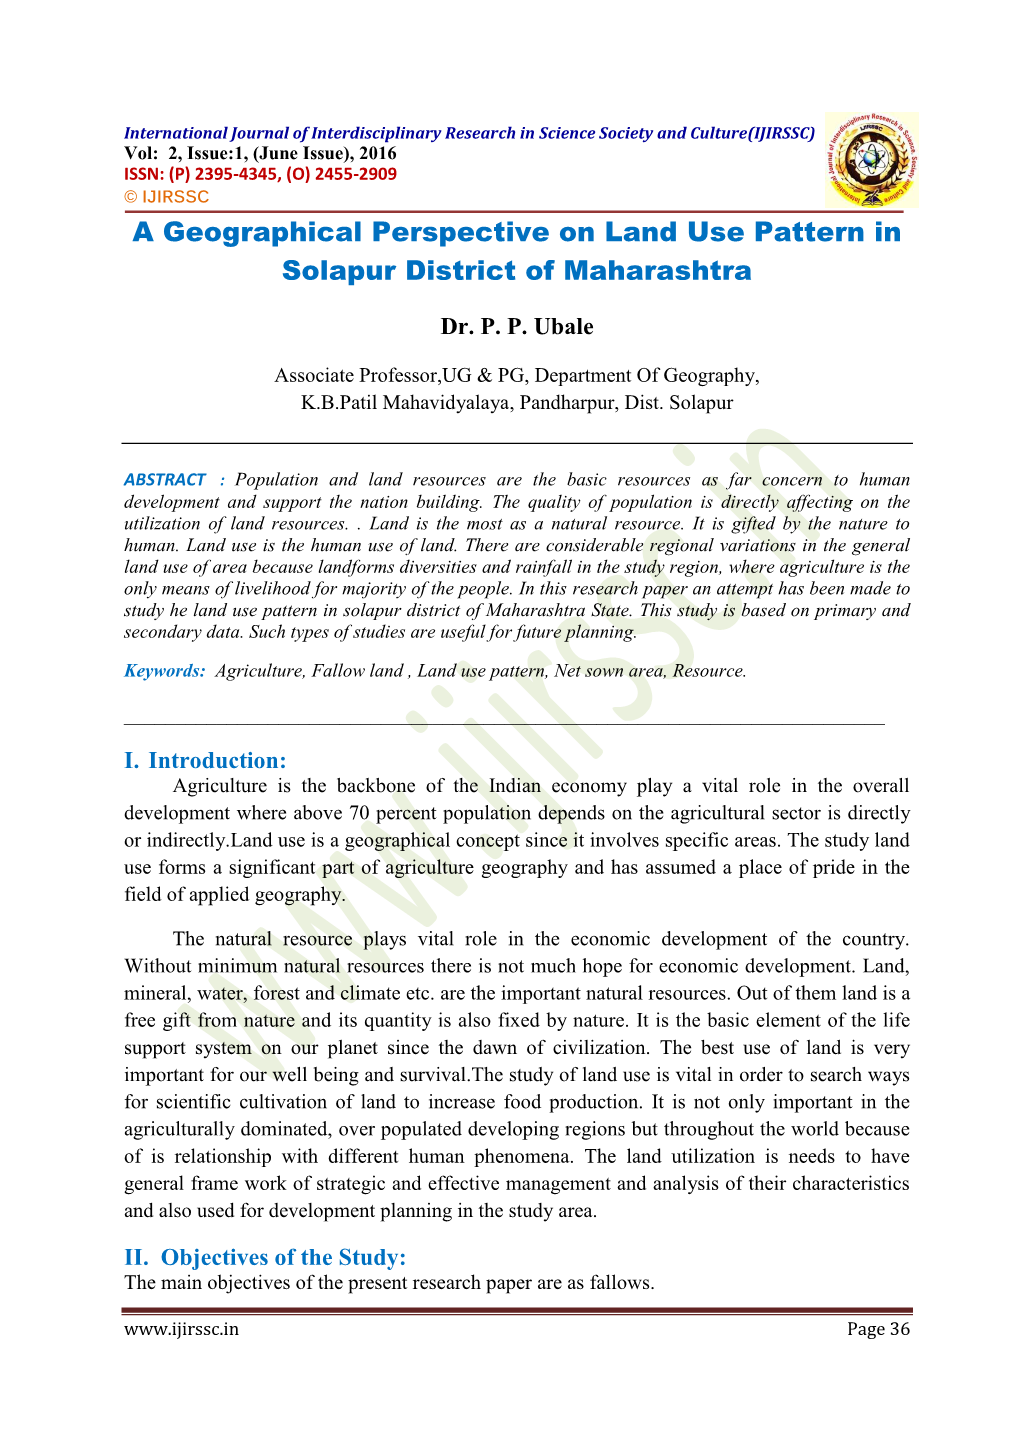 A Geographical Perspective on Land Use Pattern in Solapur District of Maharashtra